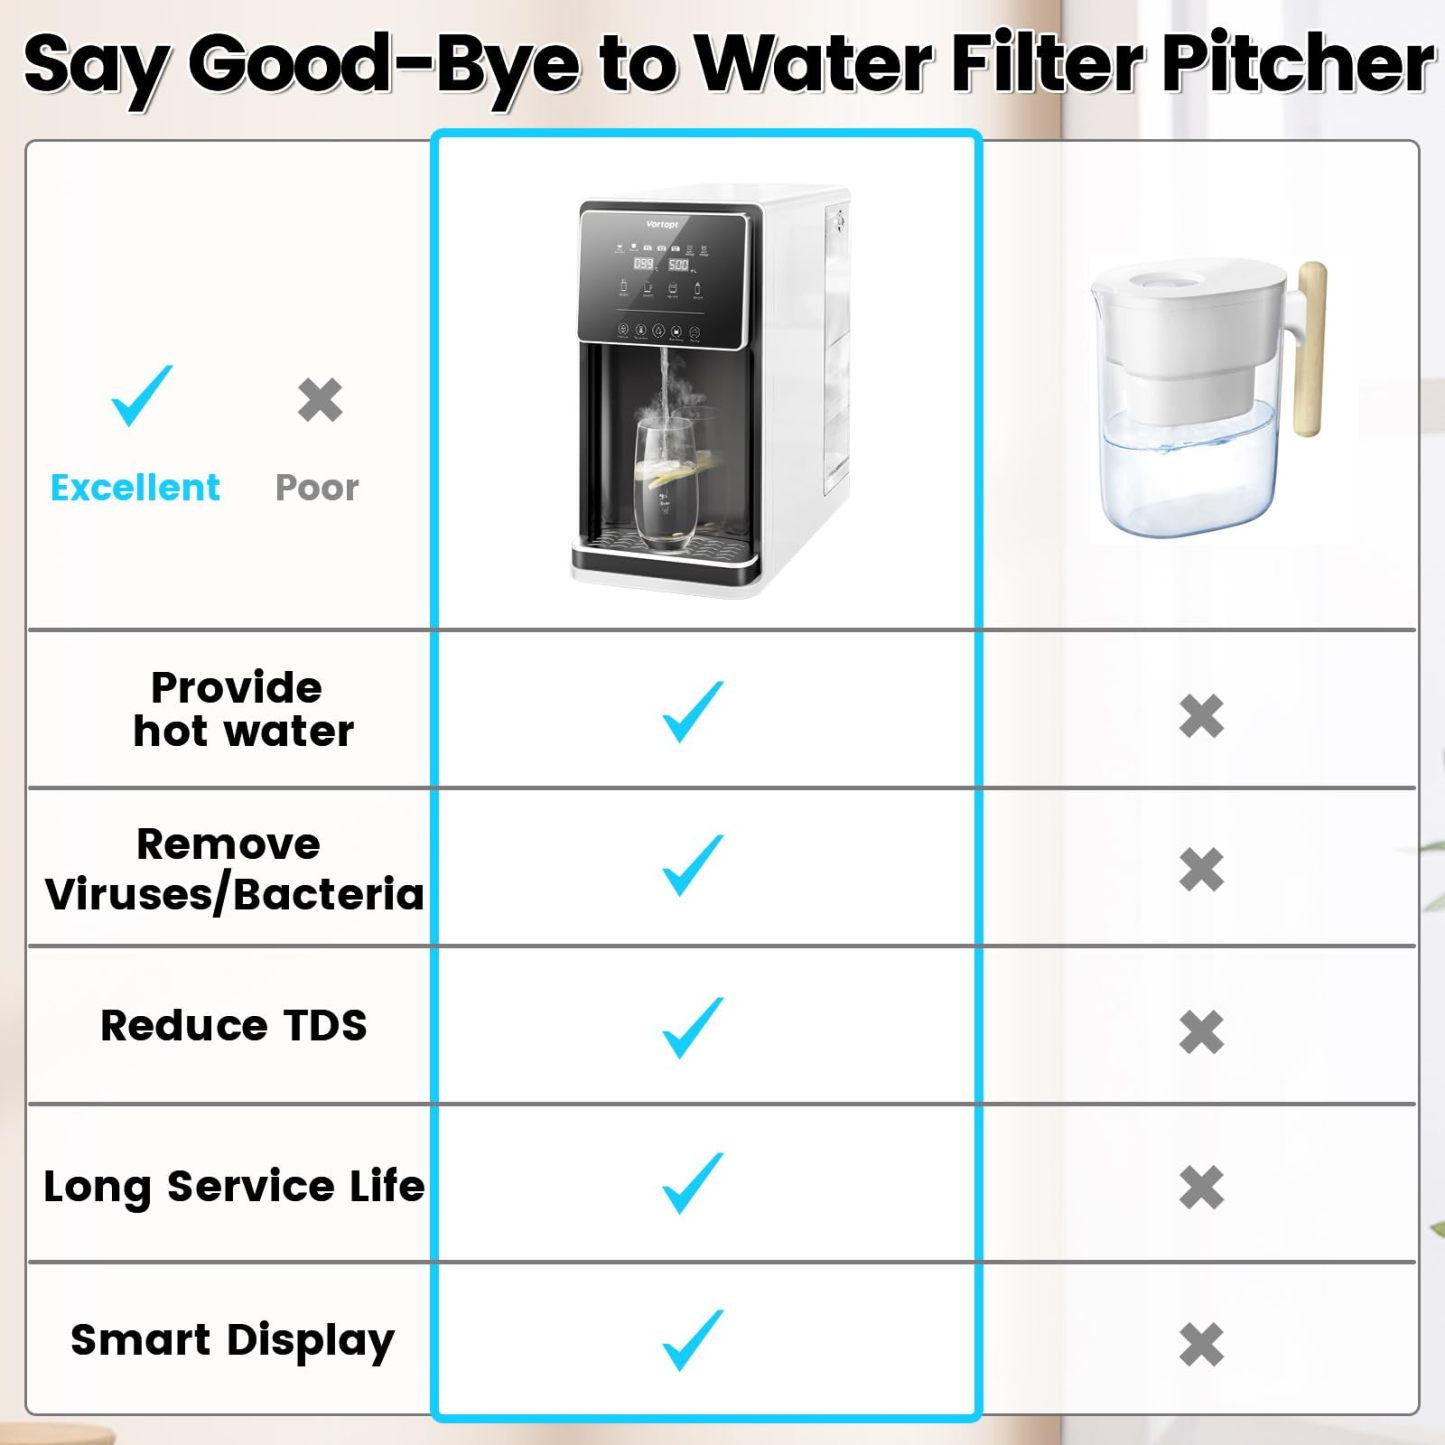 Countertop Reverse Osmosis System - 4 Stage Counter RO Water Filter,Purified Tap Water,7:1 Pure to Drain, BPA Free,UR-02